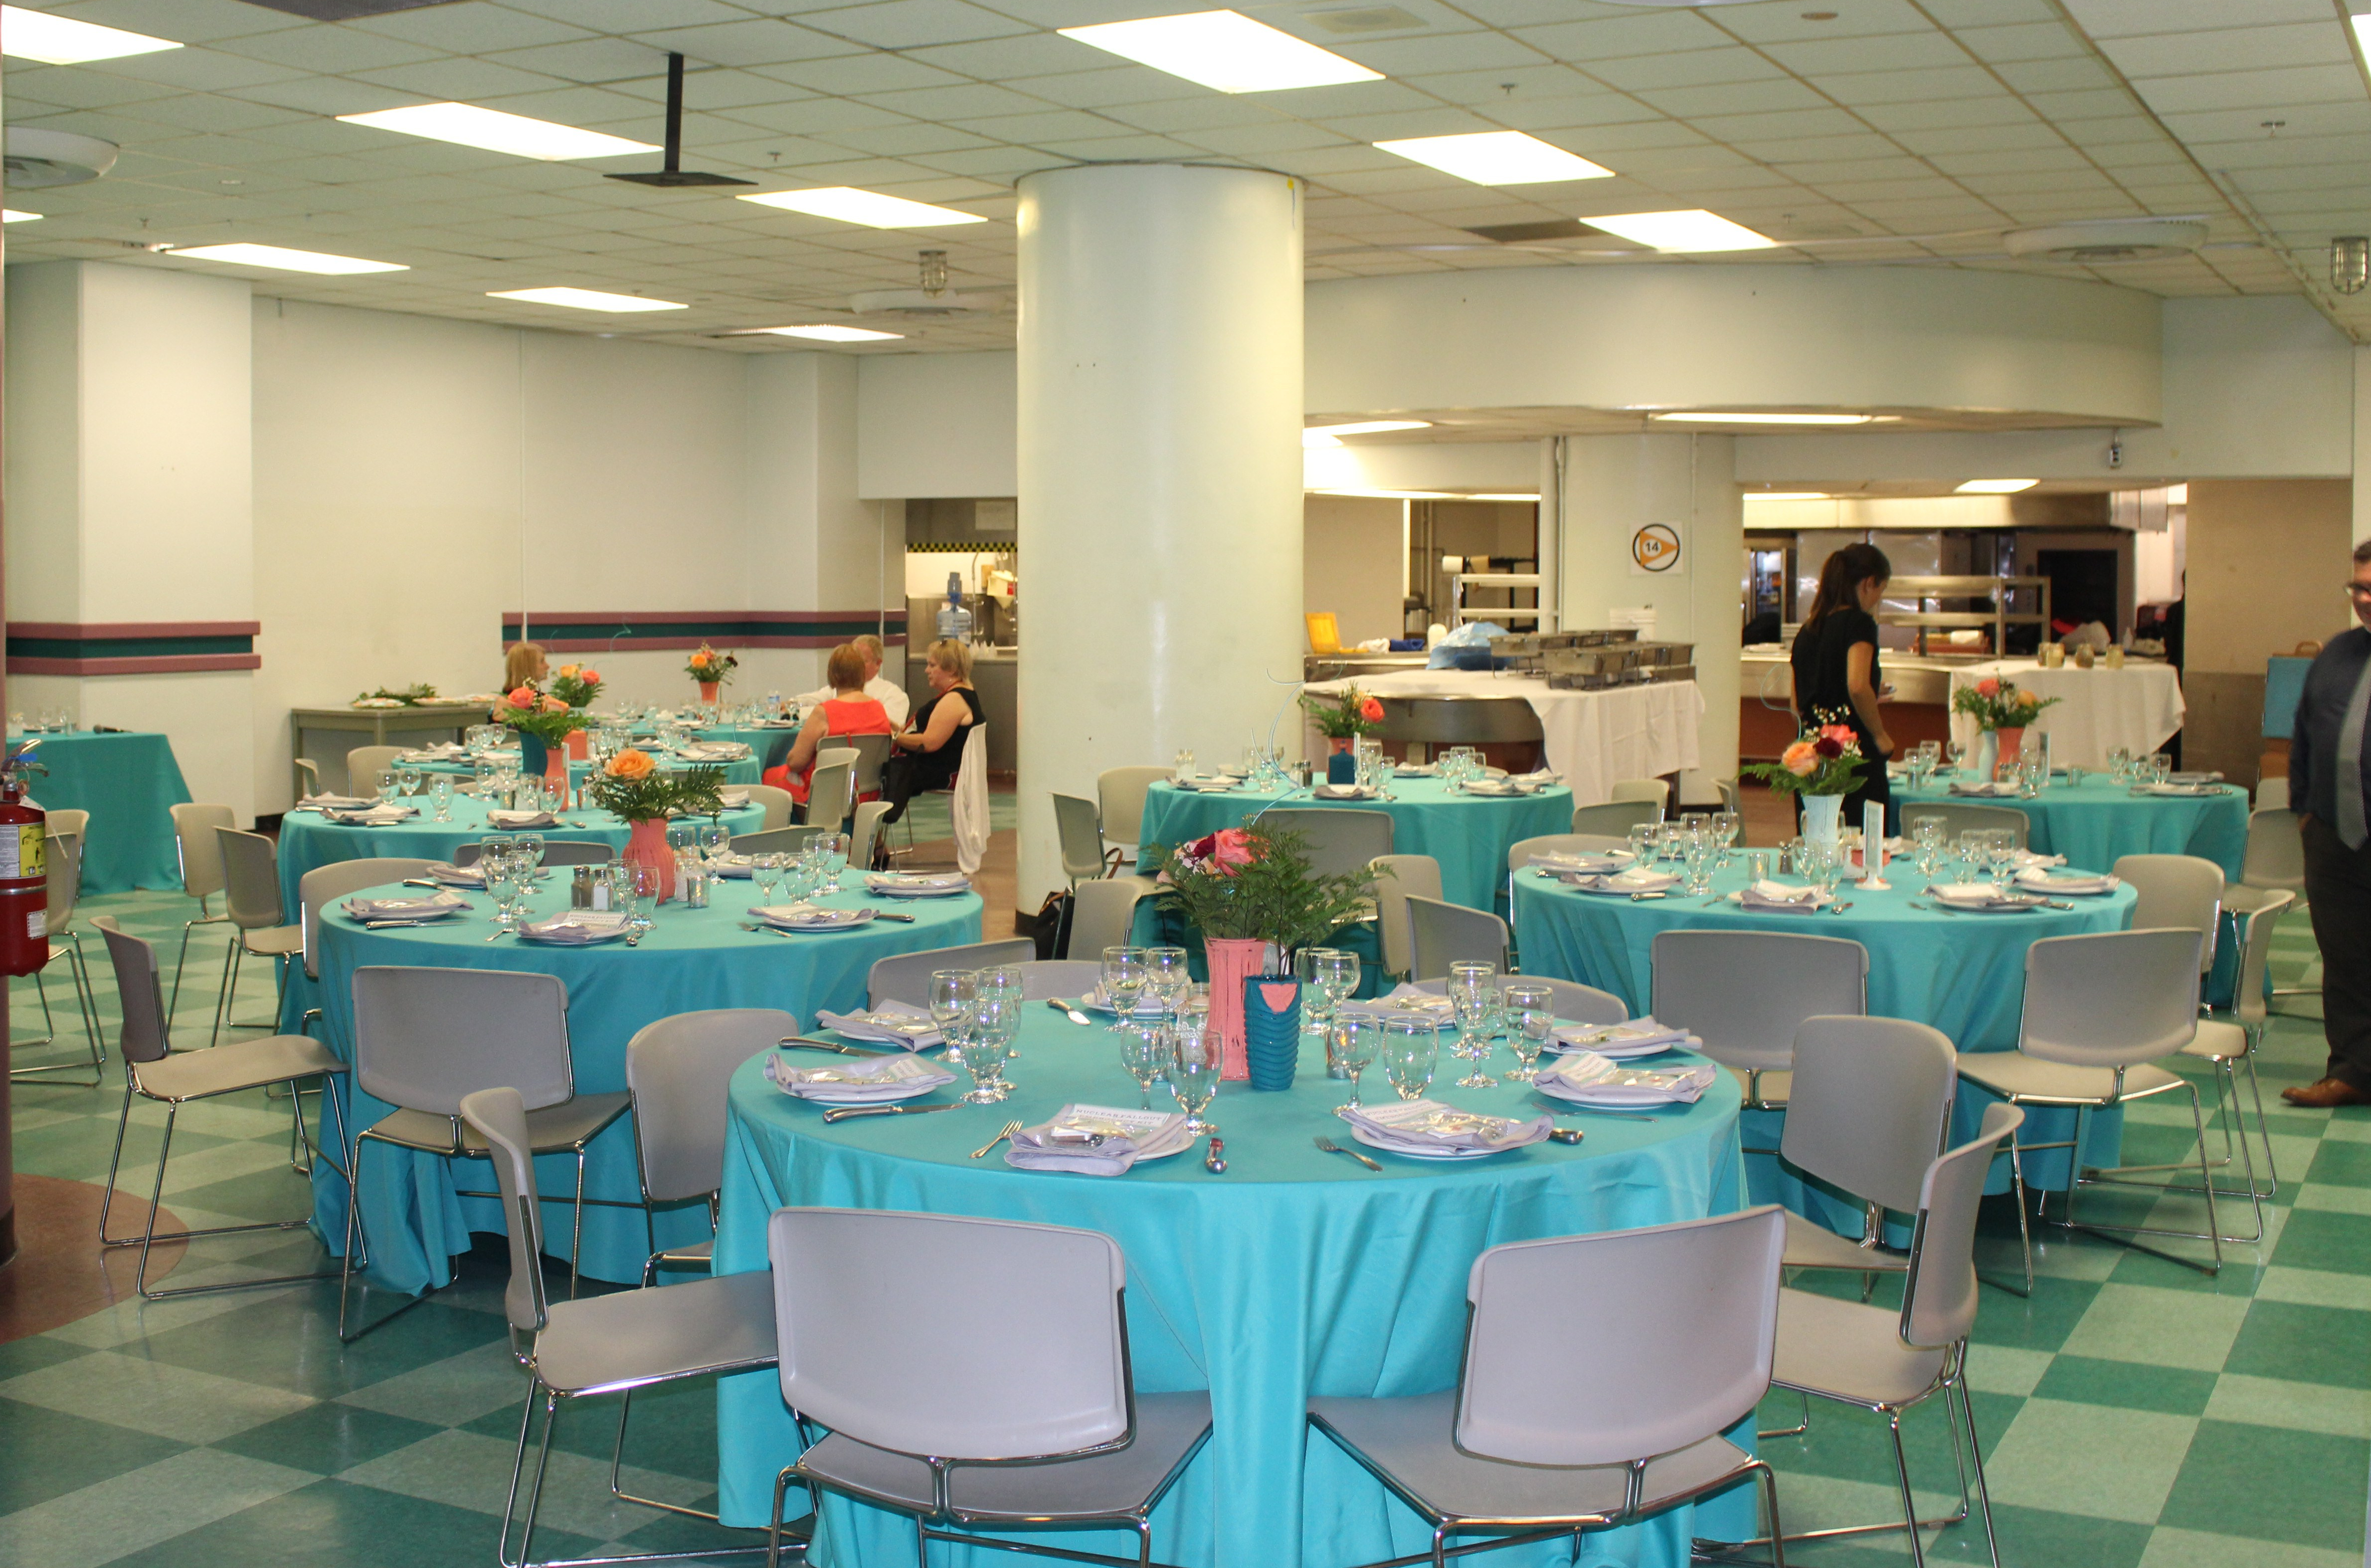 The Cafeteria set up for wedding reception